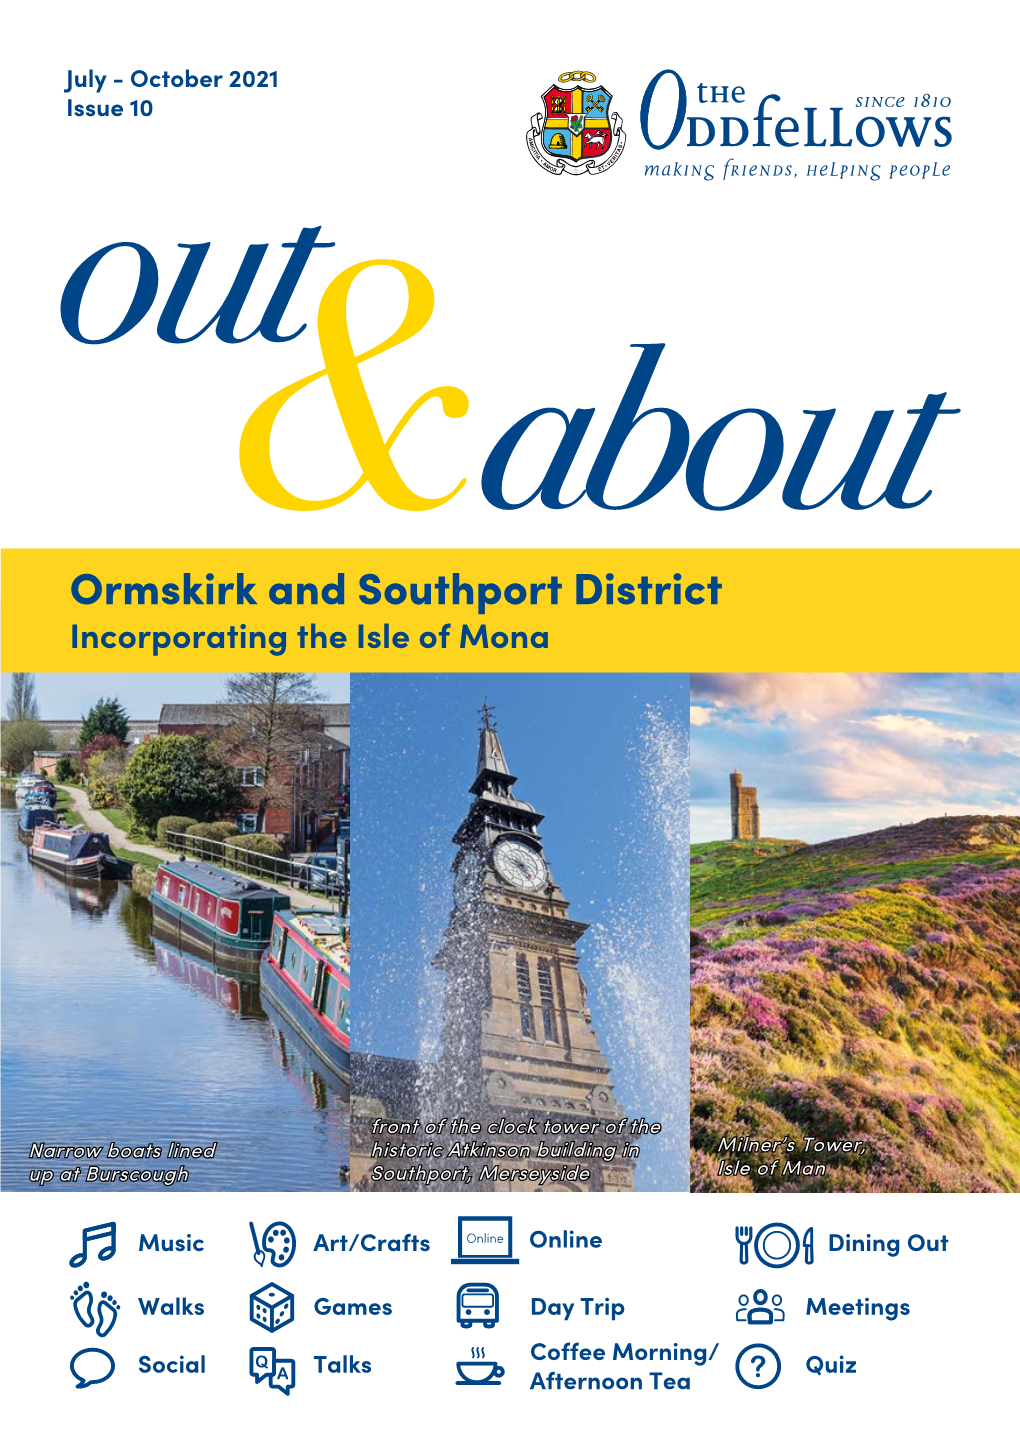 Ormskirk and Southport District Incorporating the Isle of Mona